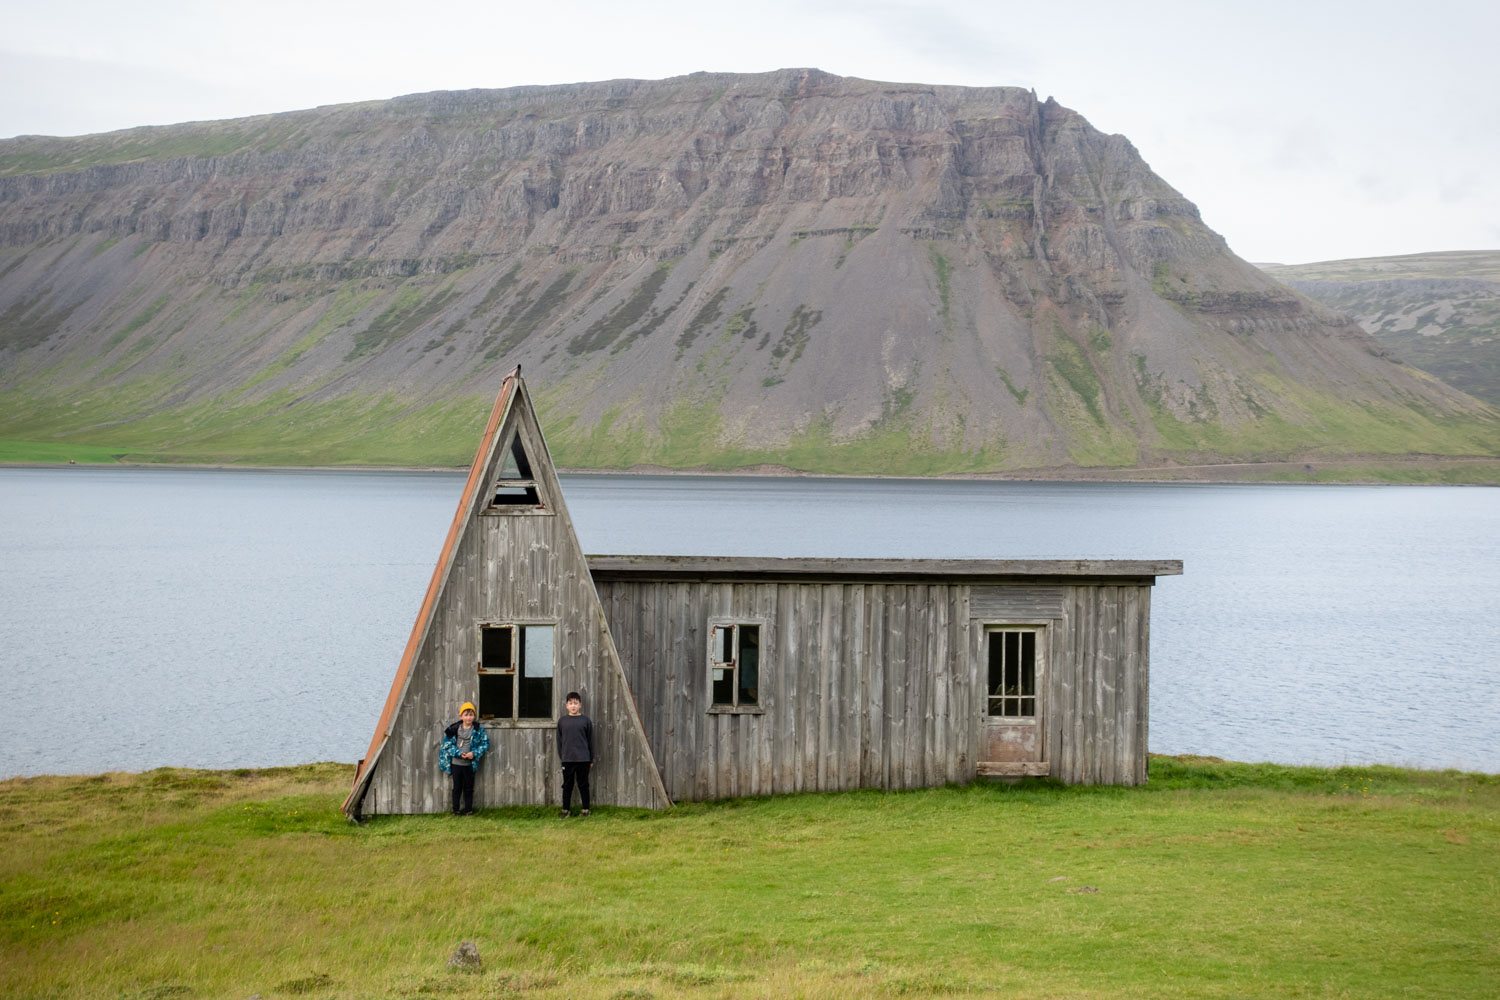 Chris Burkard's 2 sons stand in front of a wooden cabin with a fjord and mountain backdrop, at Fossfjörður in the Westfjords